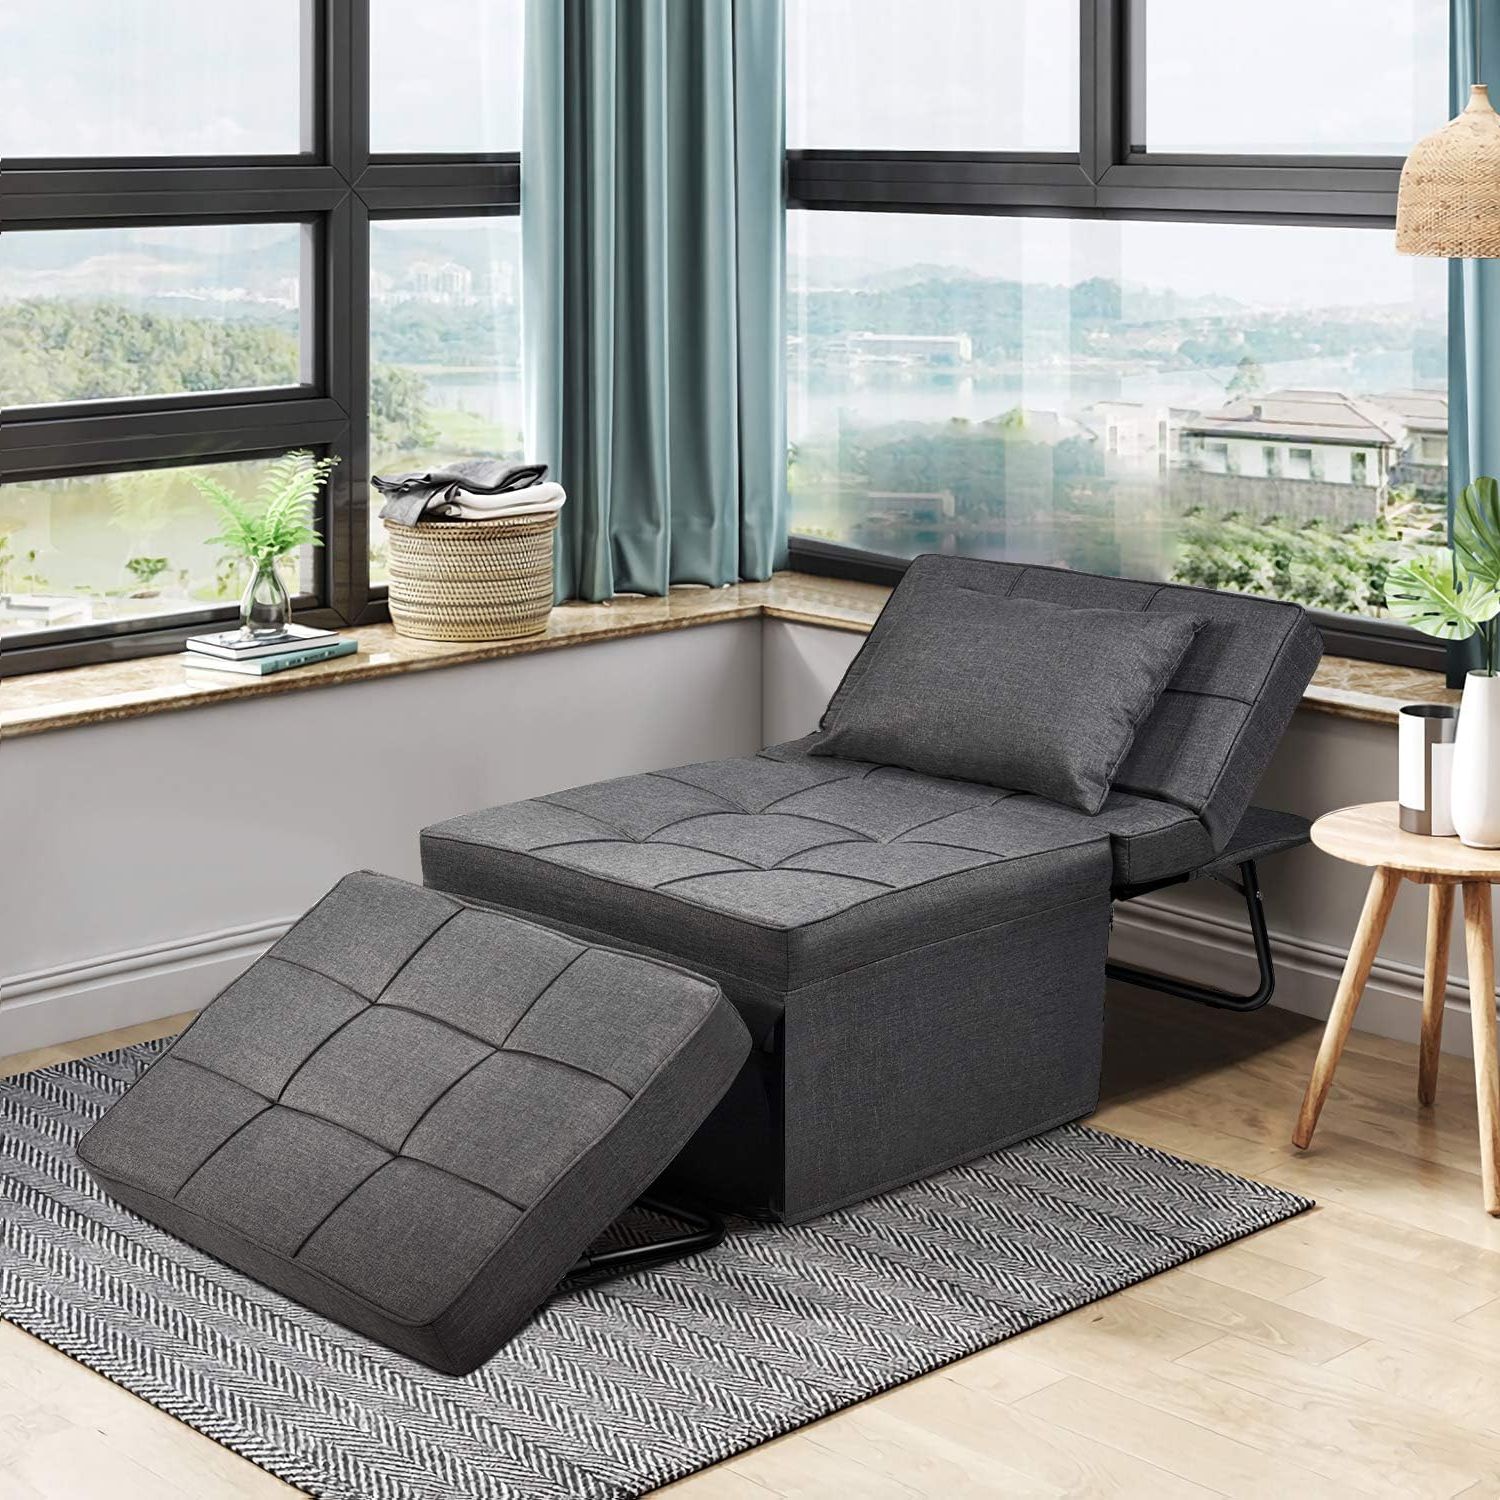 4 In 1 Convertible Sleeper Chair Beds Inside Current Amazon: Catrimown Sofa Bed, Convertible Chair 4 In 1 Multi Function (Photo 4 of 15)